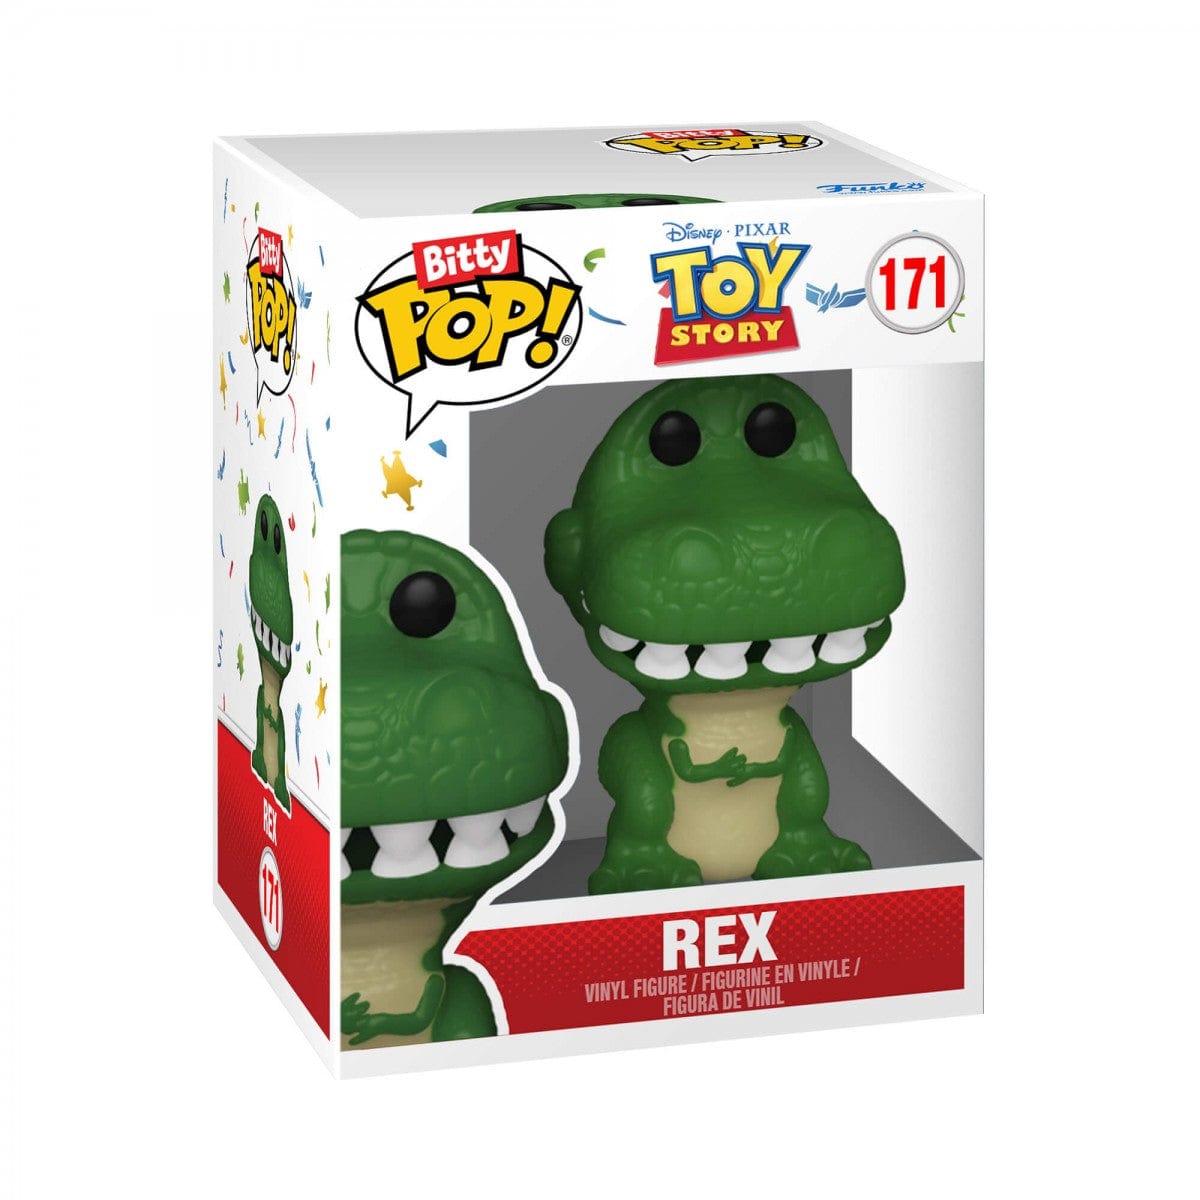 Funko Bitty POP 4 Pack: Toy Story 4